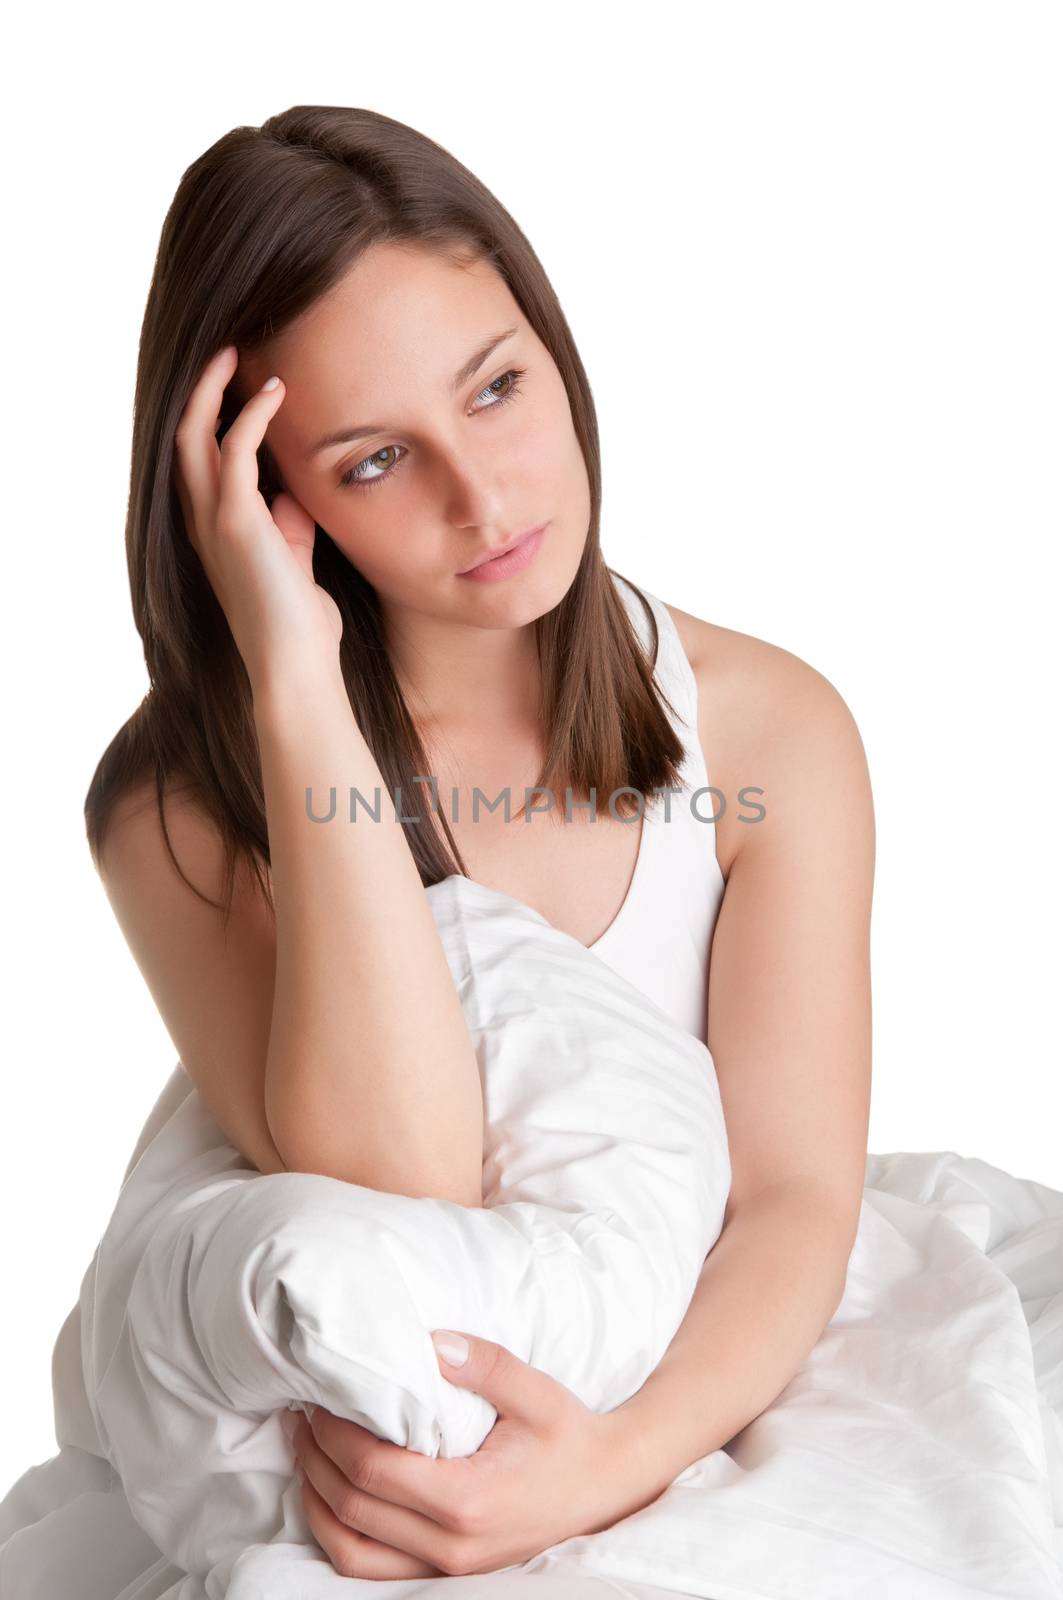 Woman sitting on a bed, waking up, isolated in white